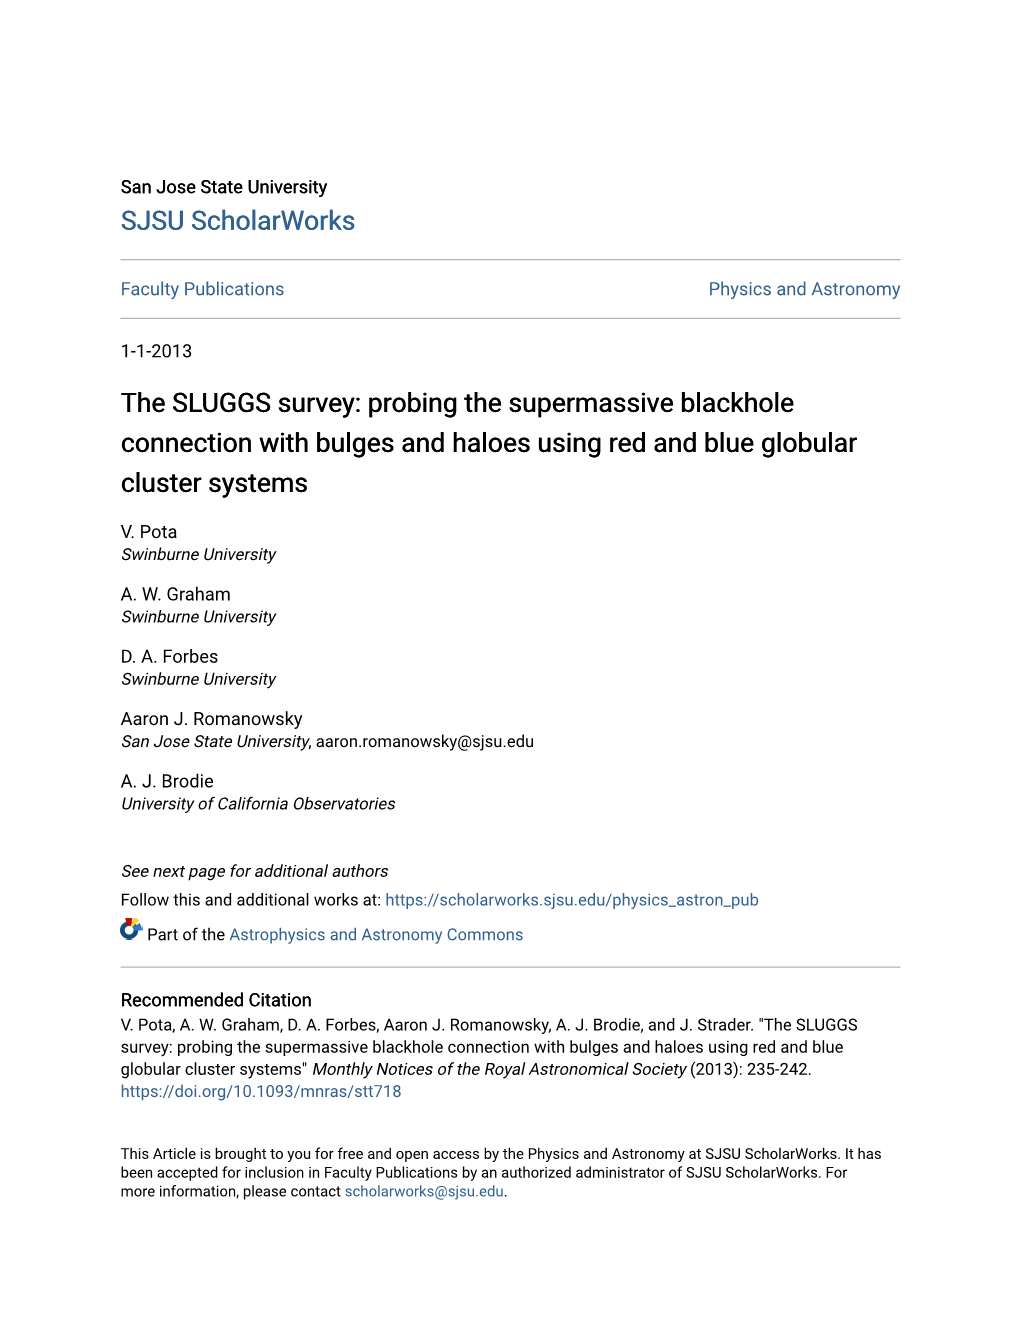 The SLUGGS Survey: Probing the Supermassive Blackhole Connection with Bulges and Haloes Using Red and Blue Globular Cluster Systems